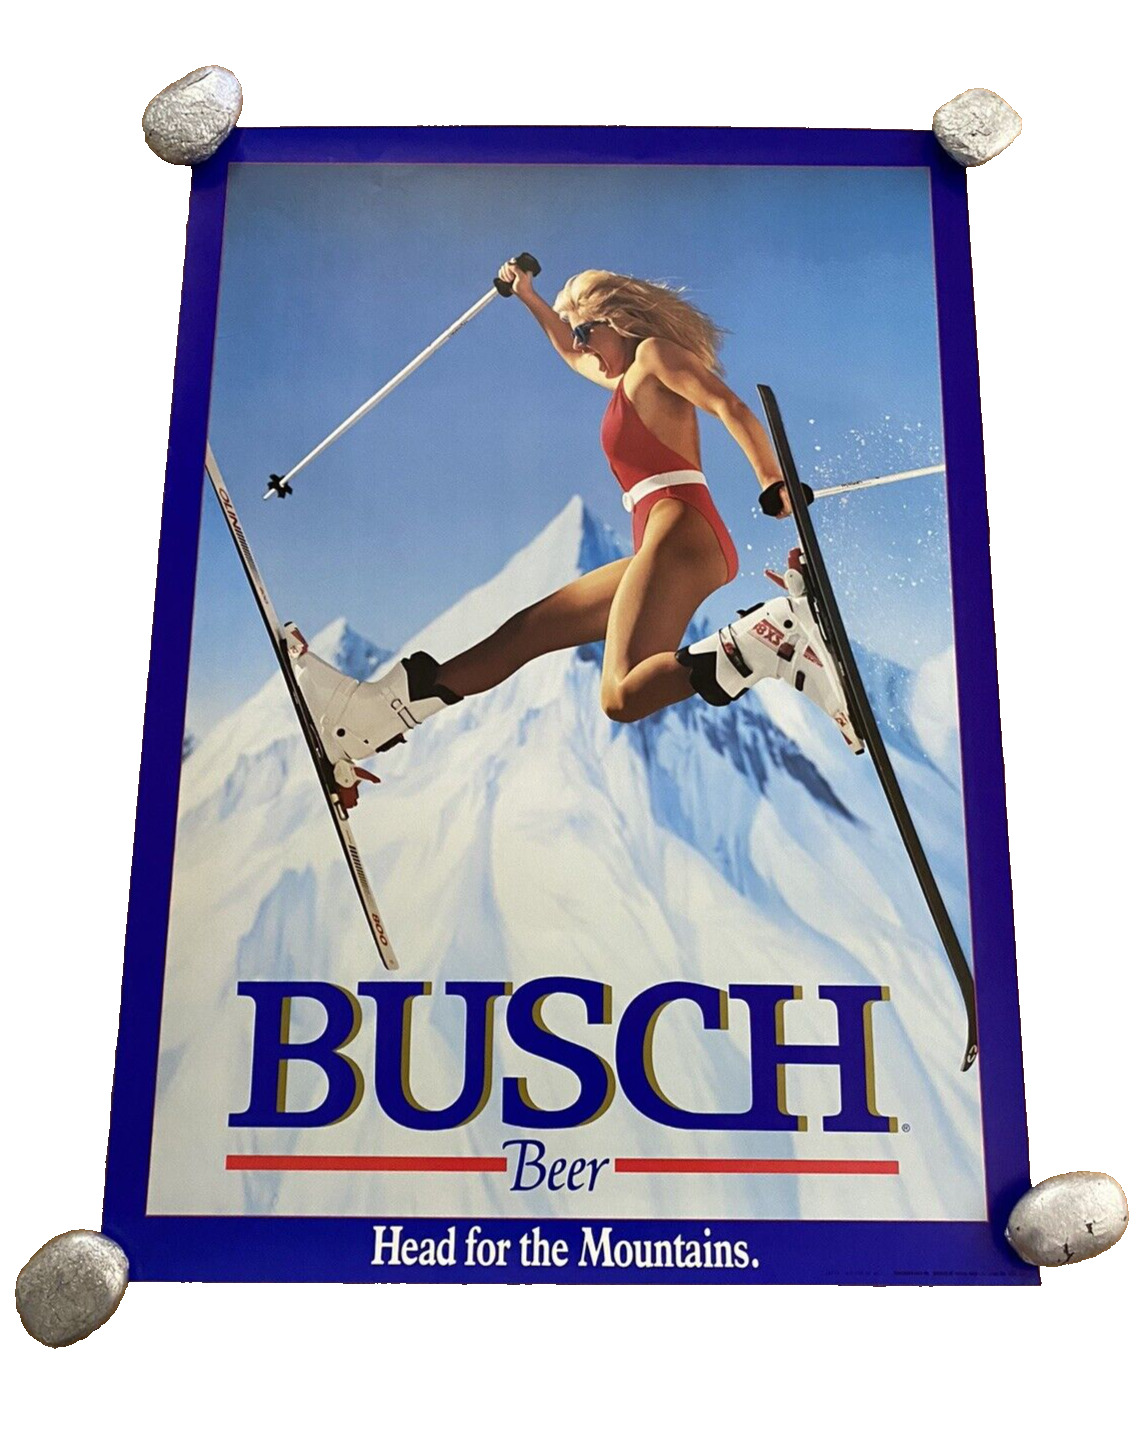 VINTAGE 1988 BUSCH BEER ORIGINAL POSTER HEAD FOR THE MOUNTAINS GIRL SKIING 20x28